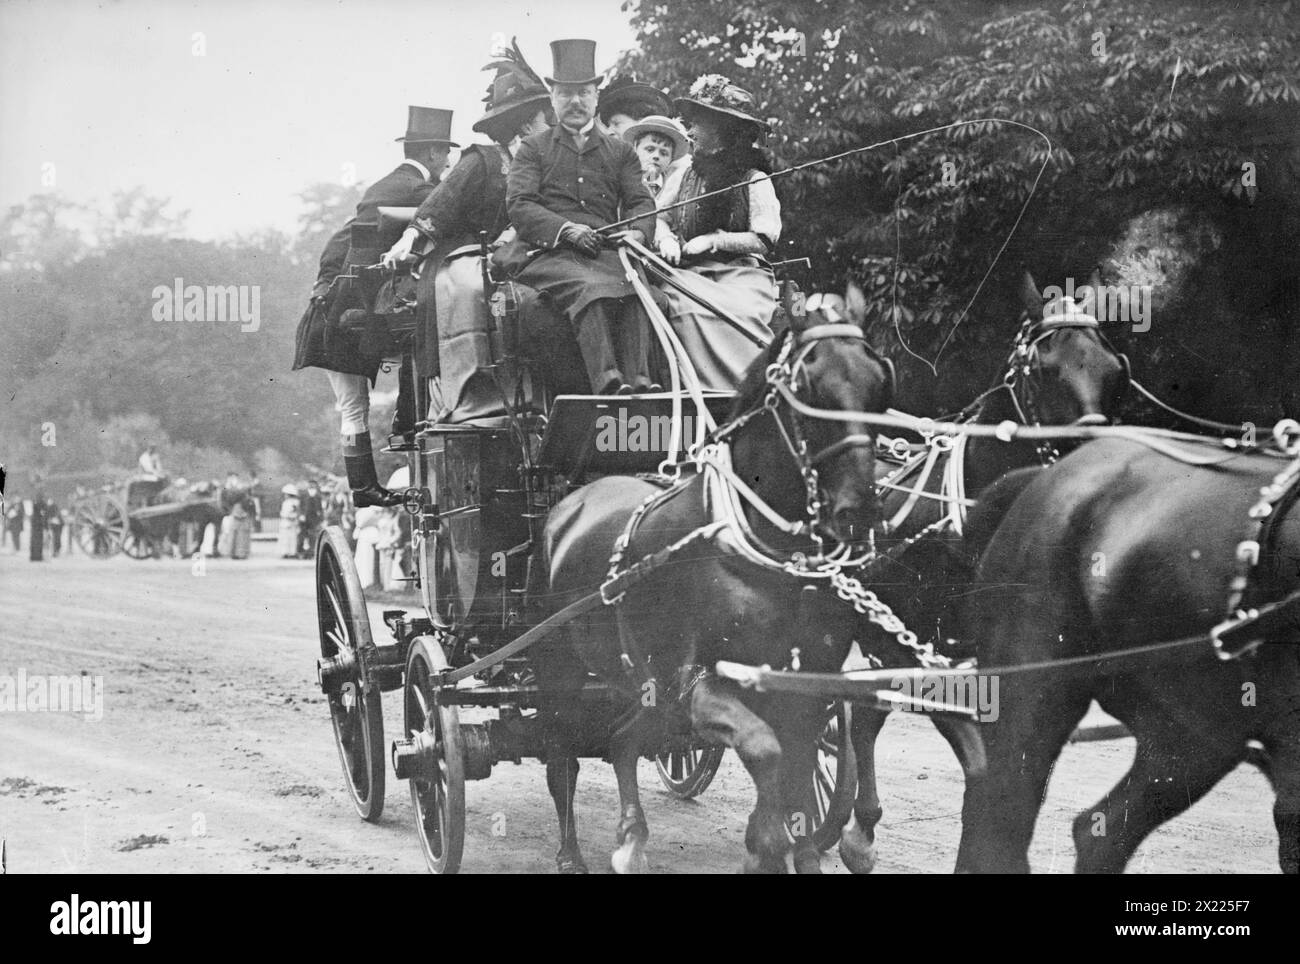 Lord Leconfield and Coach, between c1910 and c1915. Shows Charles Henry Wyndham, 3rd Baron Leconfield GCVO (1872-1952), who was a British peer, Army officer and political figure. Stock Photo